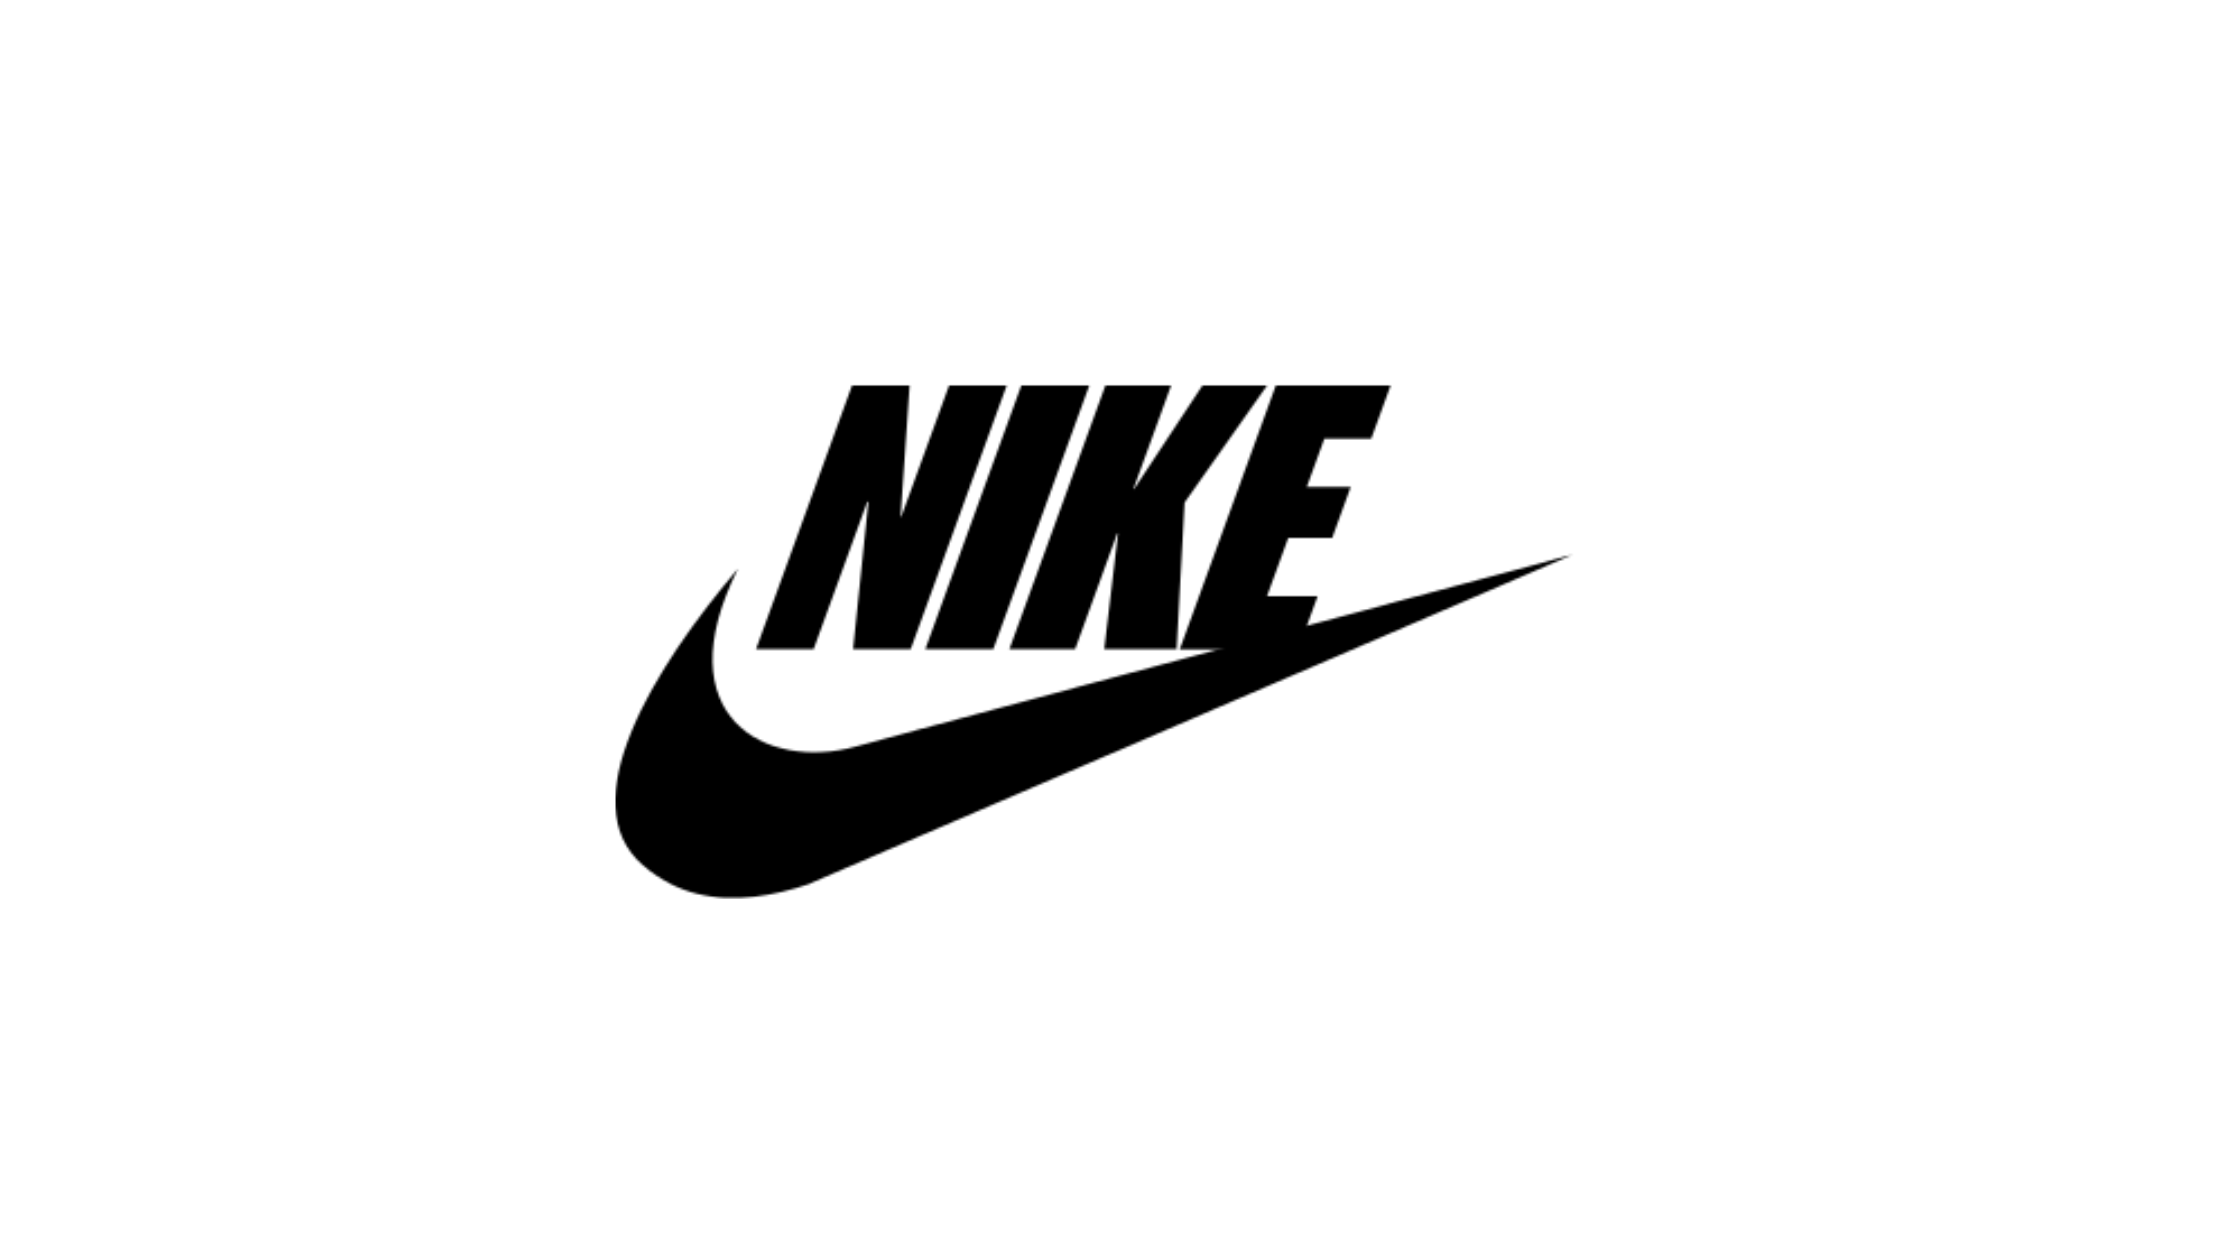 What Font Does Nike Use?